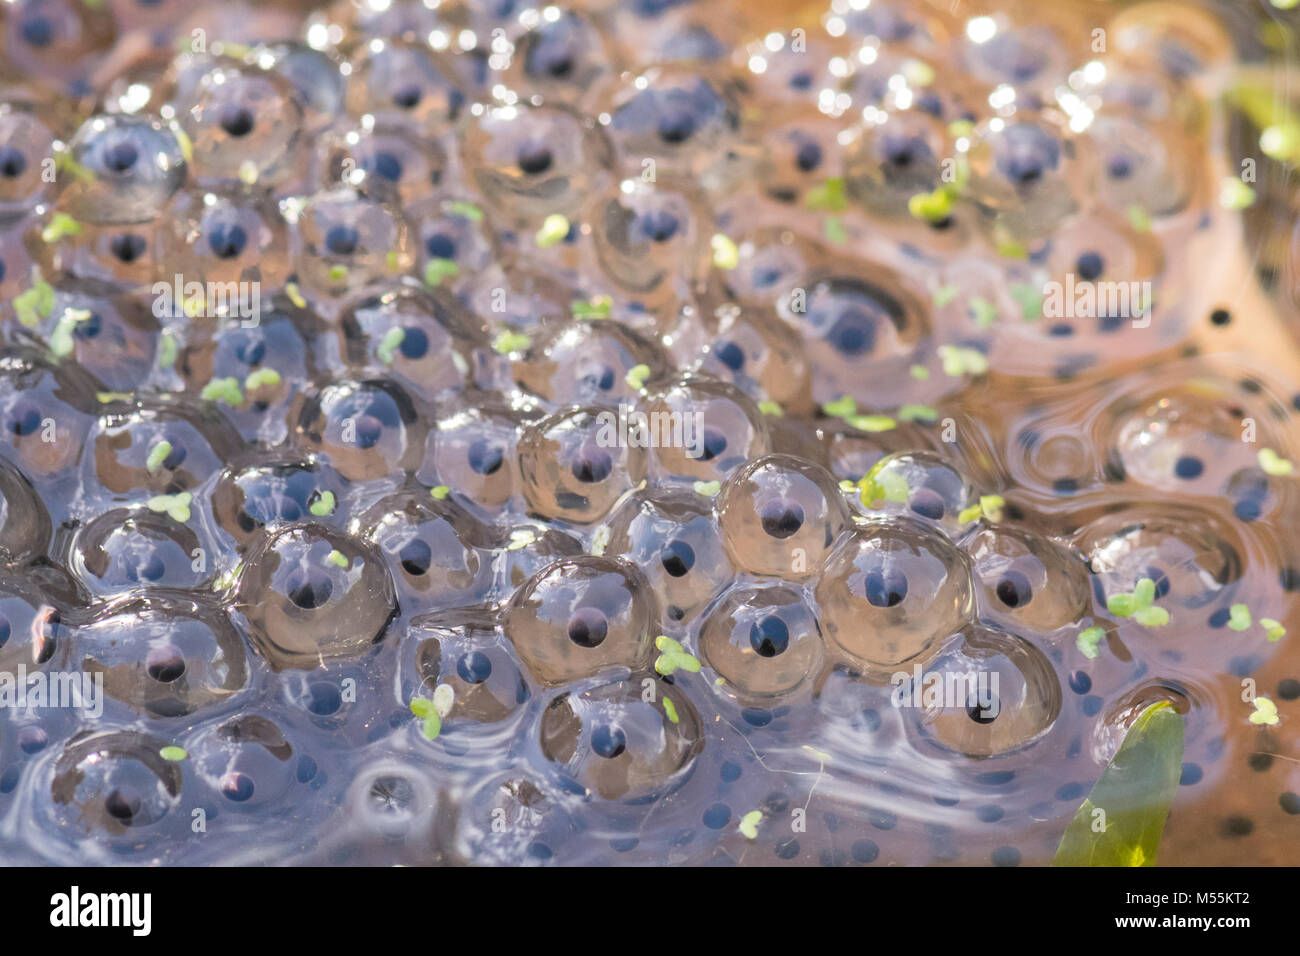 Stirlingshire, Scotland, UK - 20 February 2018: UK weather - the first  clump of frogspawn appears in a Stirlingshire garden pond on a much warmer and brighter day, heralding the start of spring Credit: Kay Roxby/Alamy Live News Stock Photo